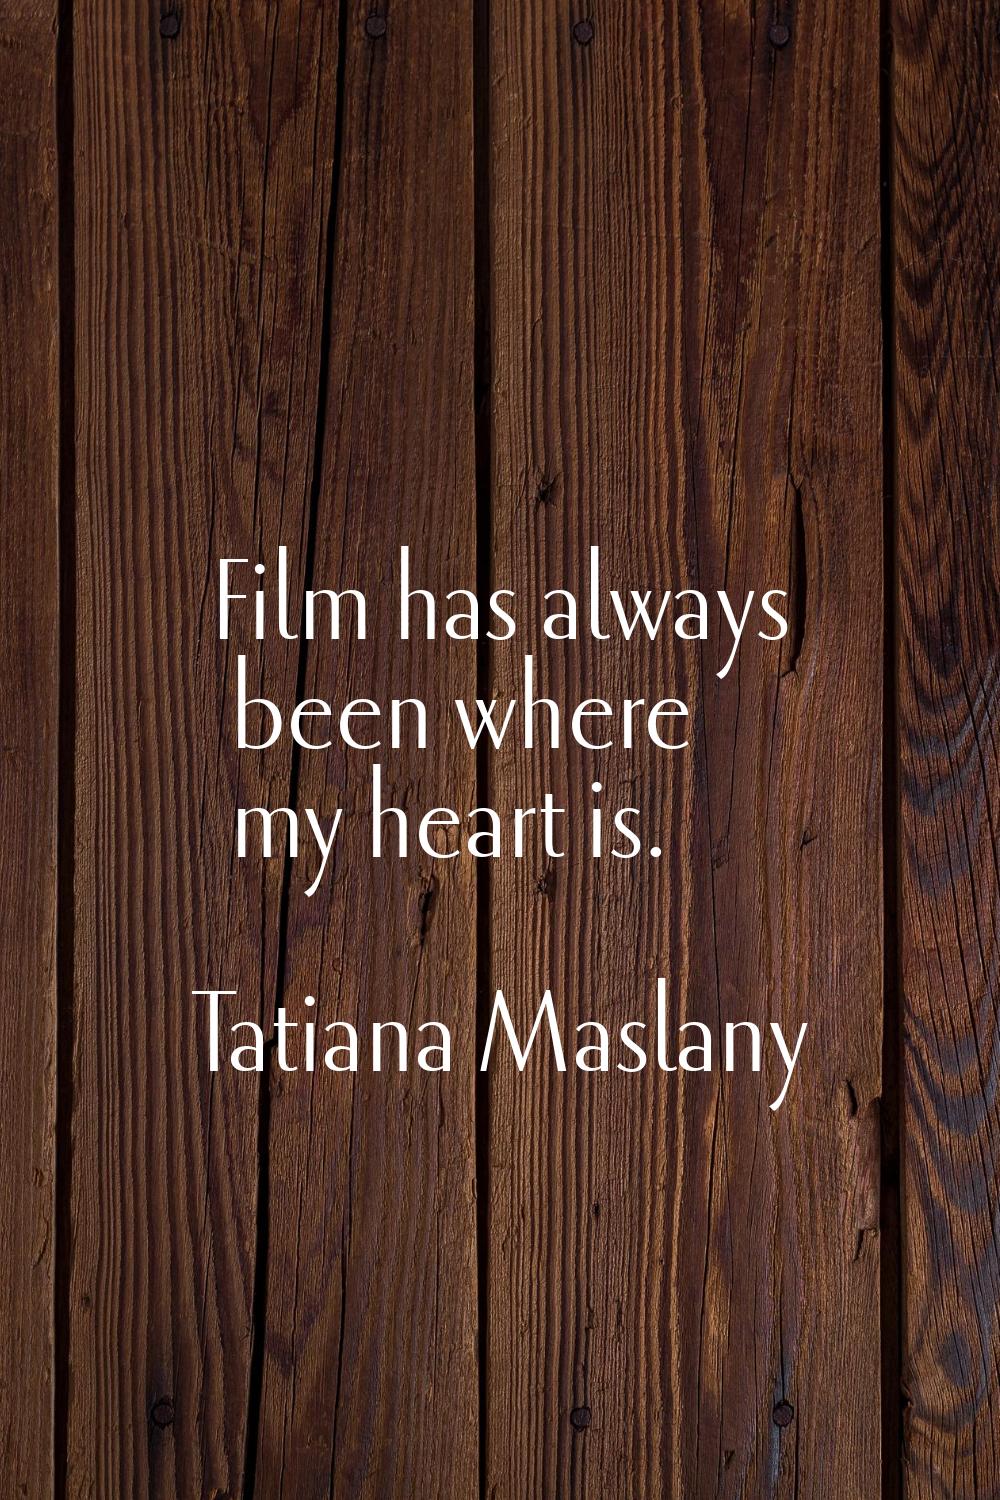 Film has always been where my heart is.